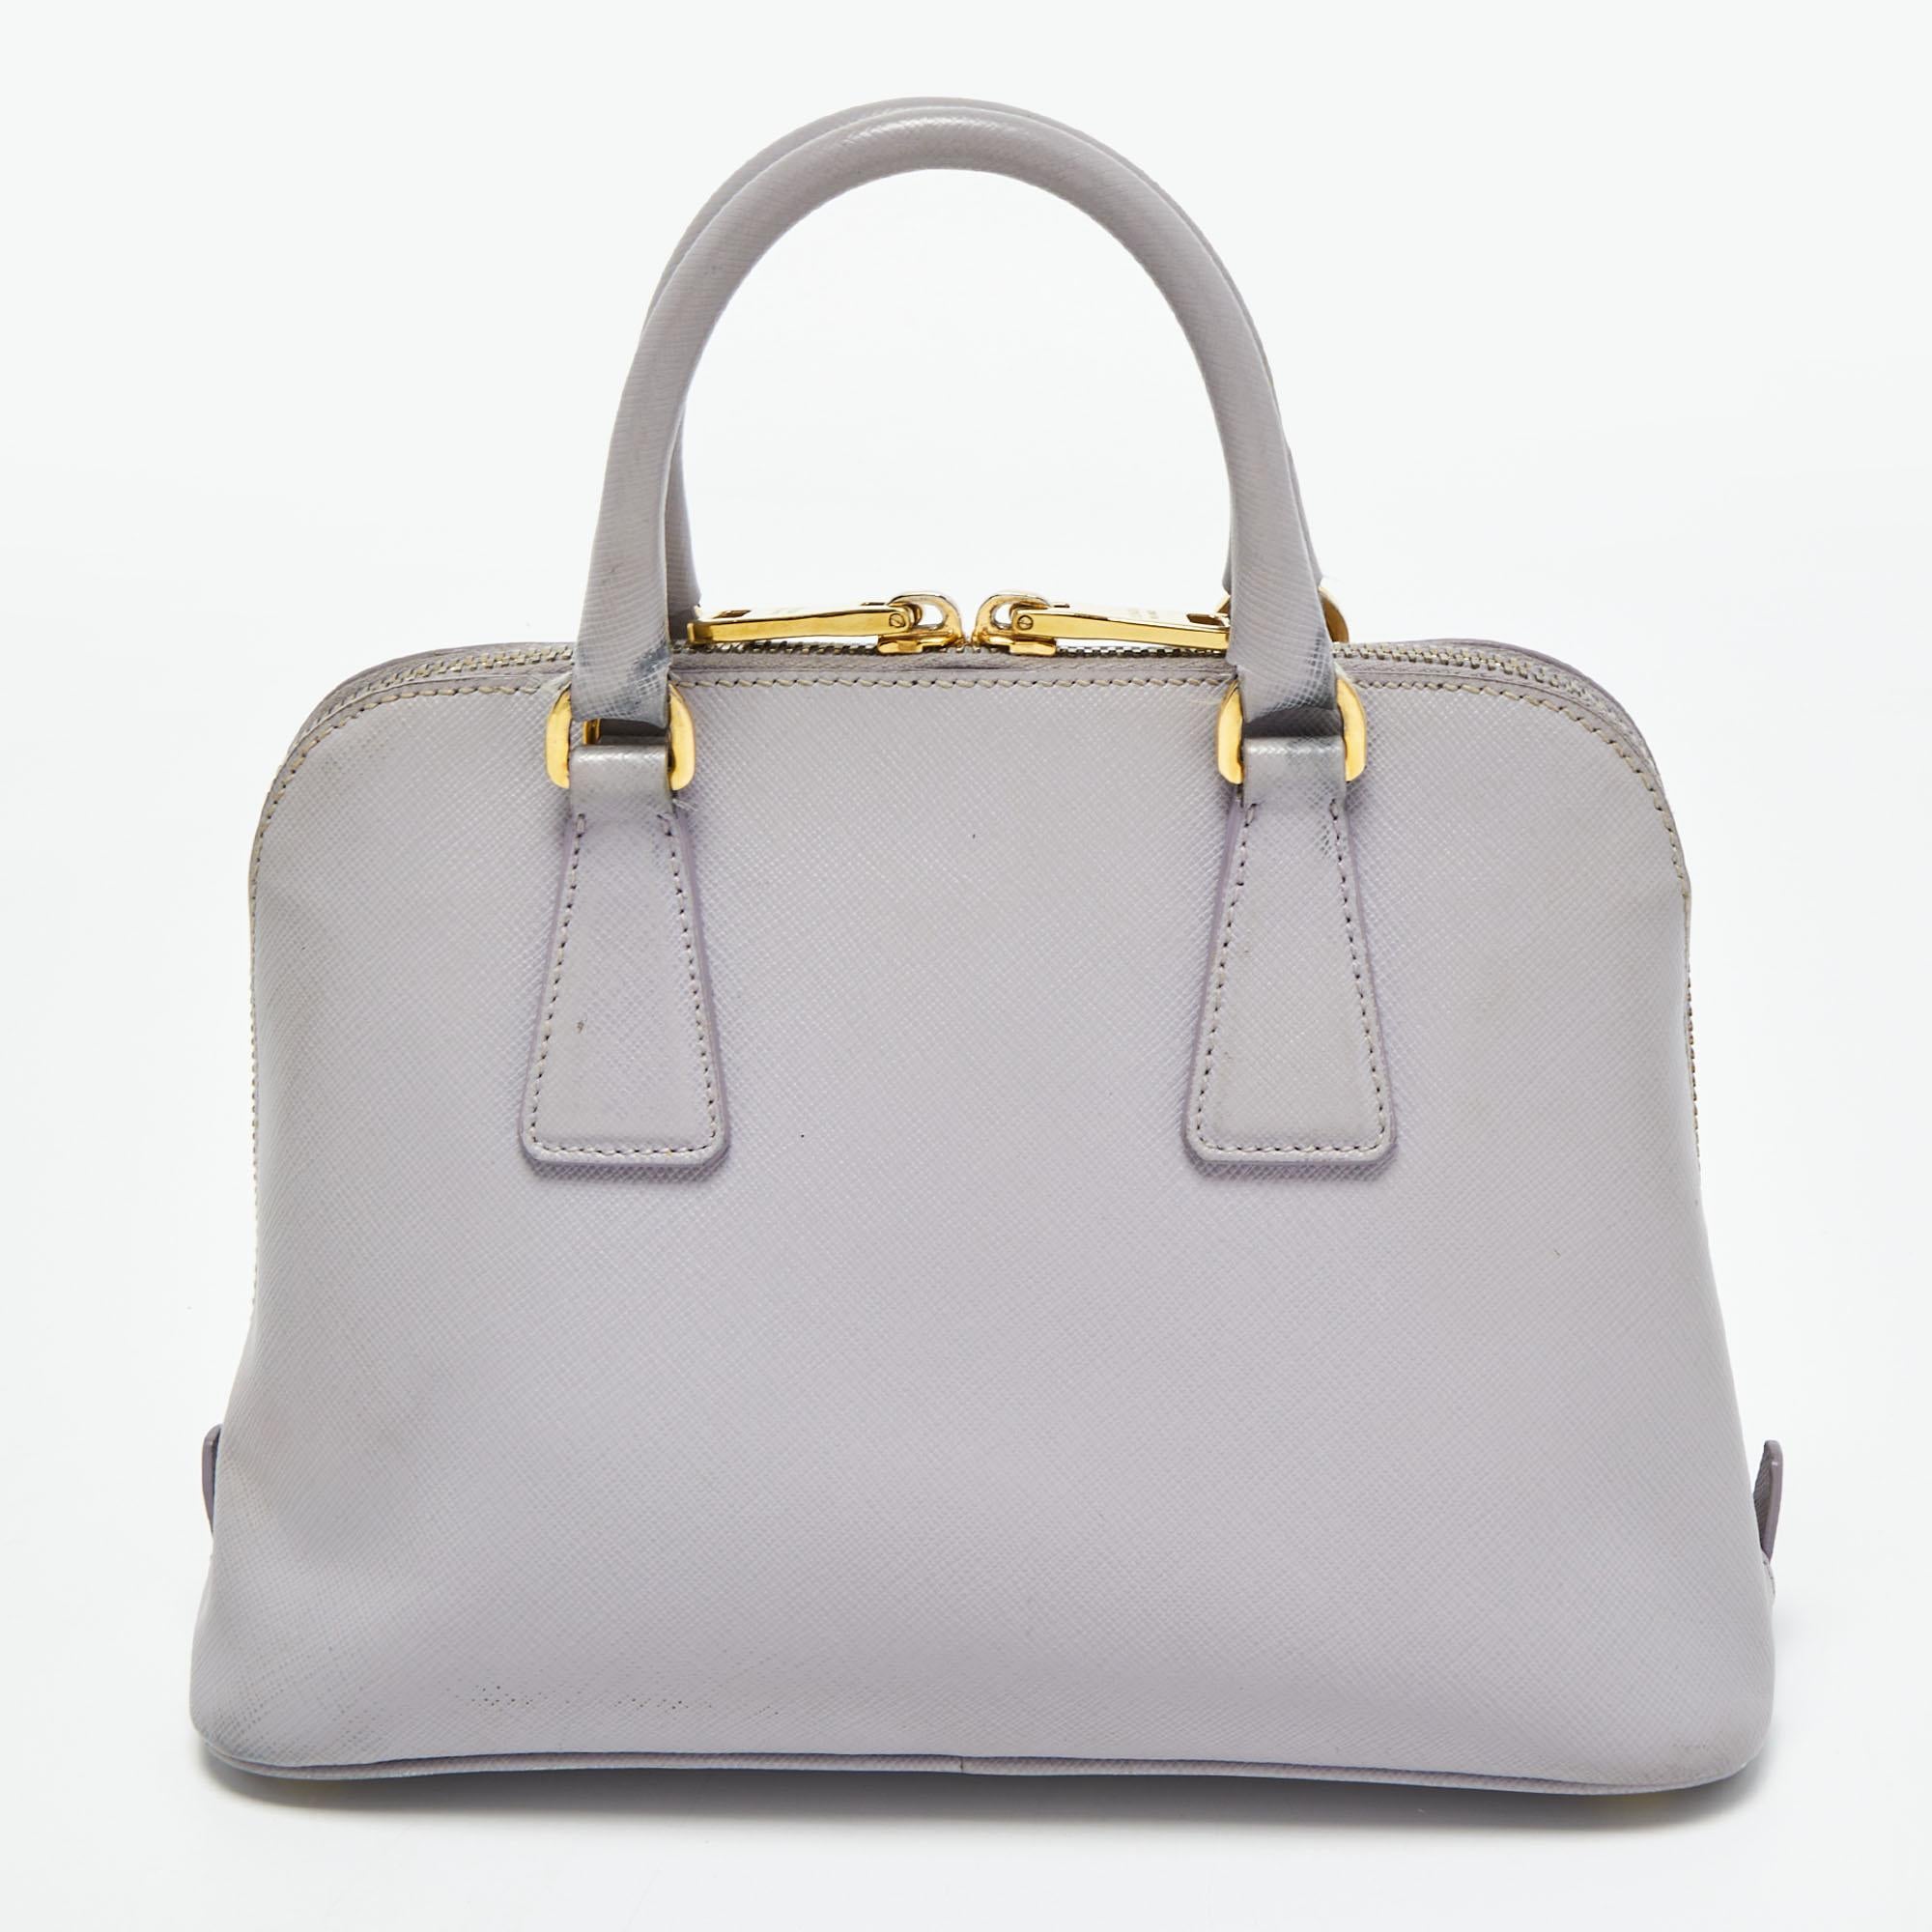 The simple silhouette and the use of durable materials for the exterior bring out the appeal of this Prada satchel for women. It features comfortable handles and a well-lined interior.

Includes: Detachable Strap
 